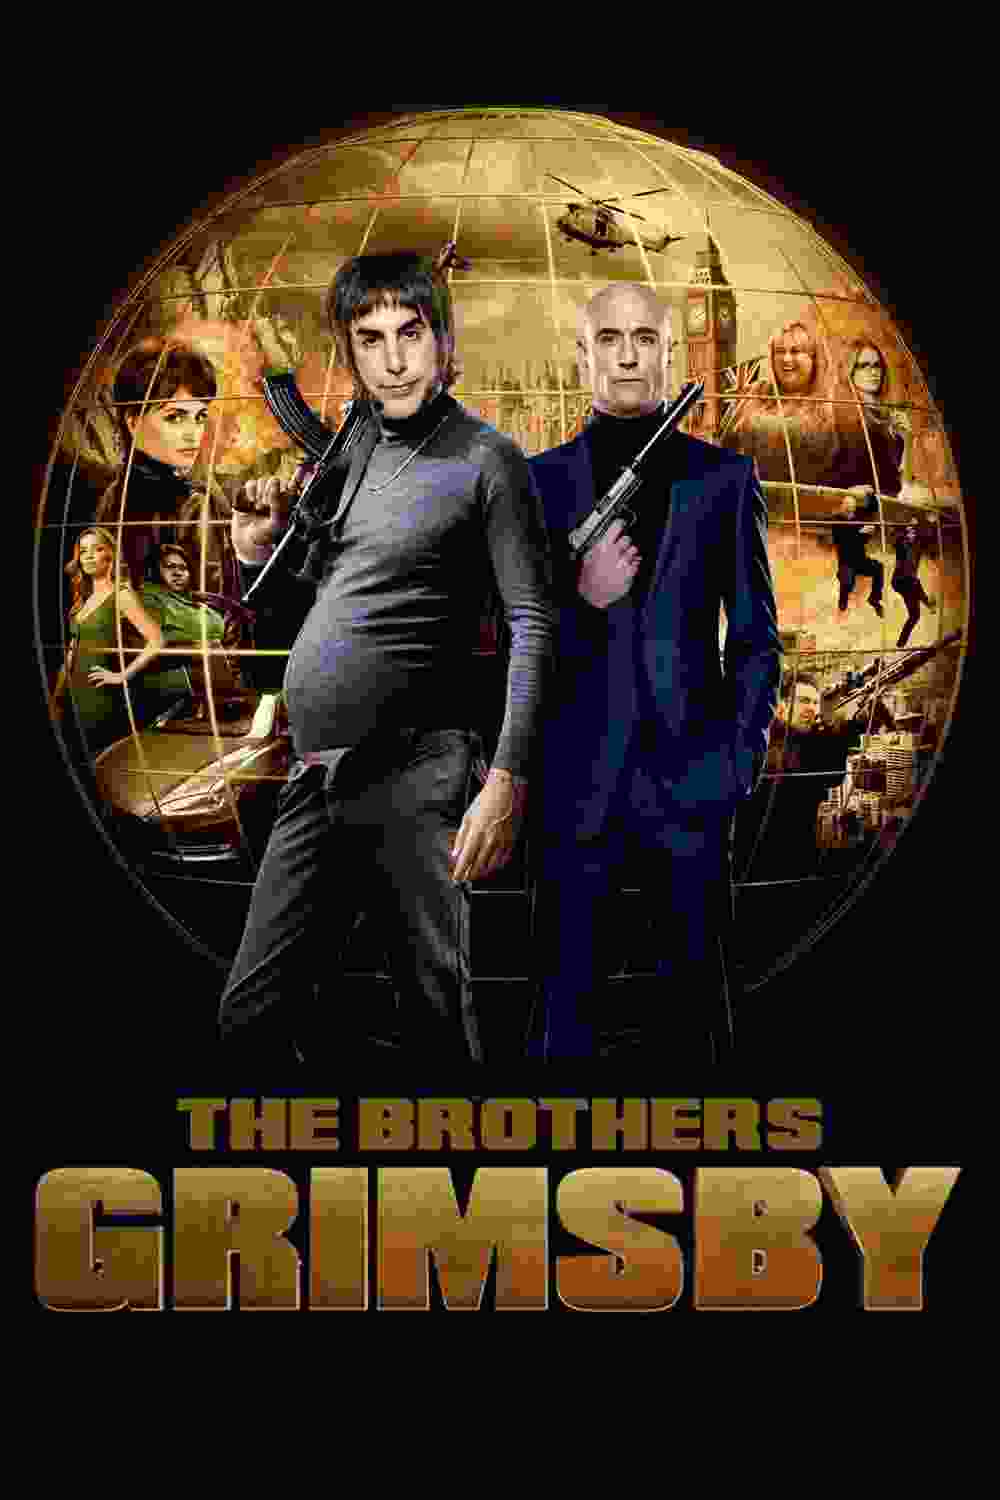 The Brothers Grimsby (2016) Sacha Baron Cohen